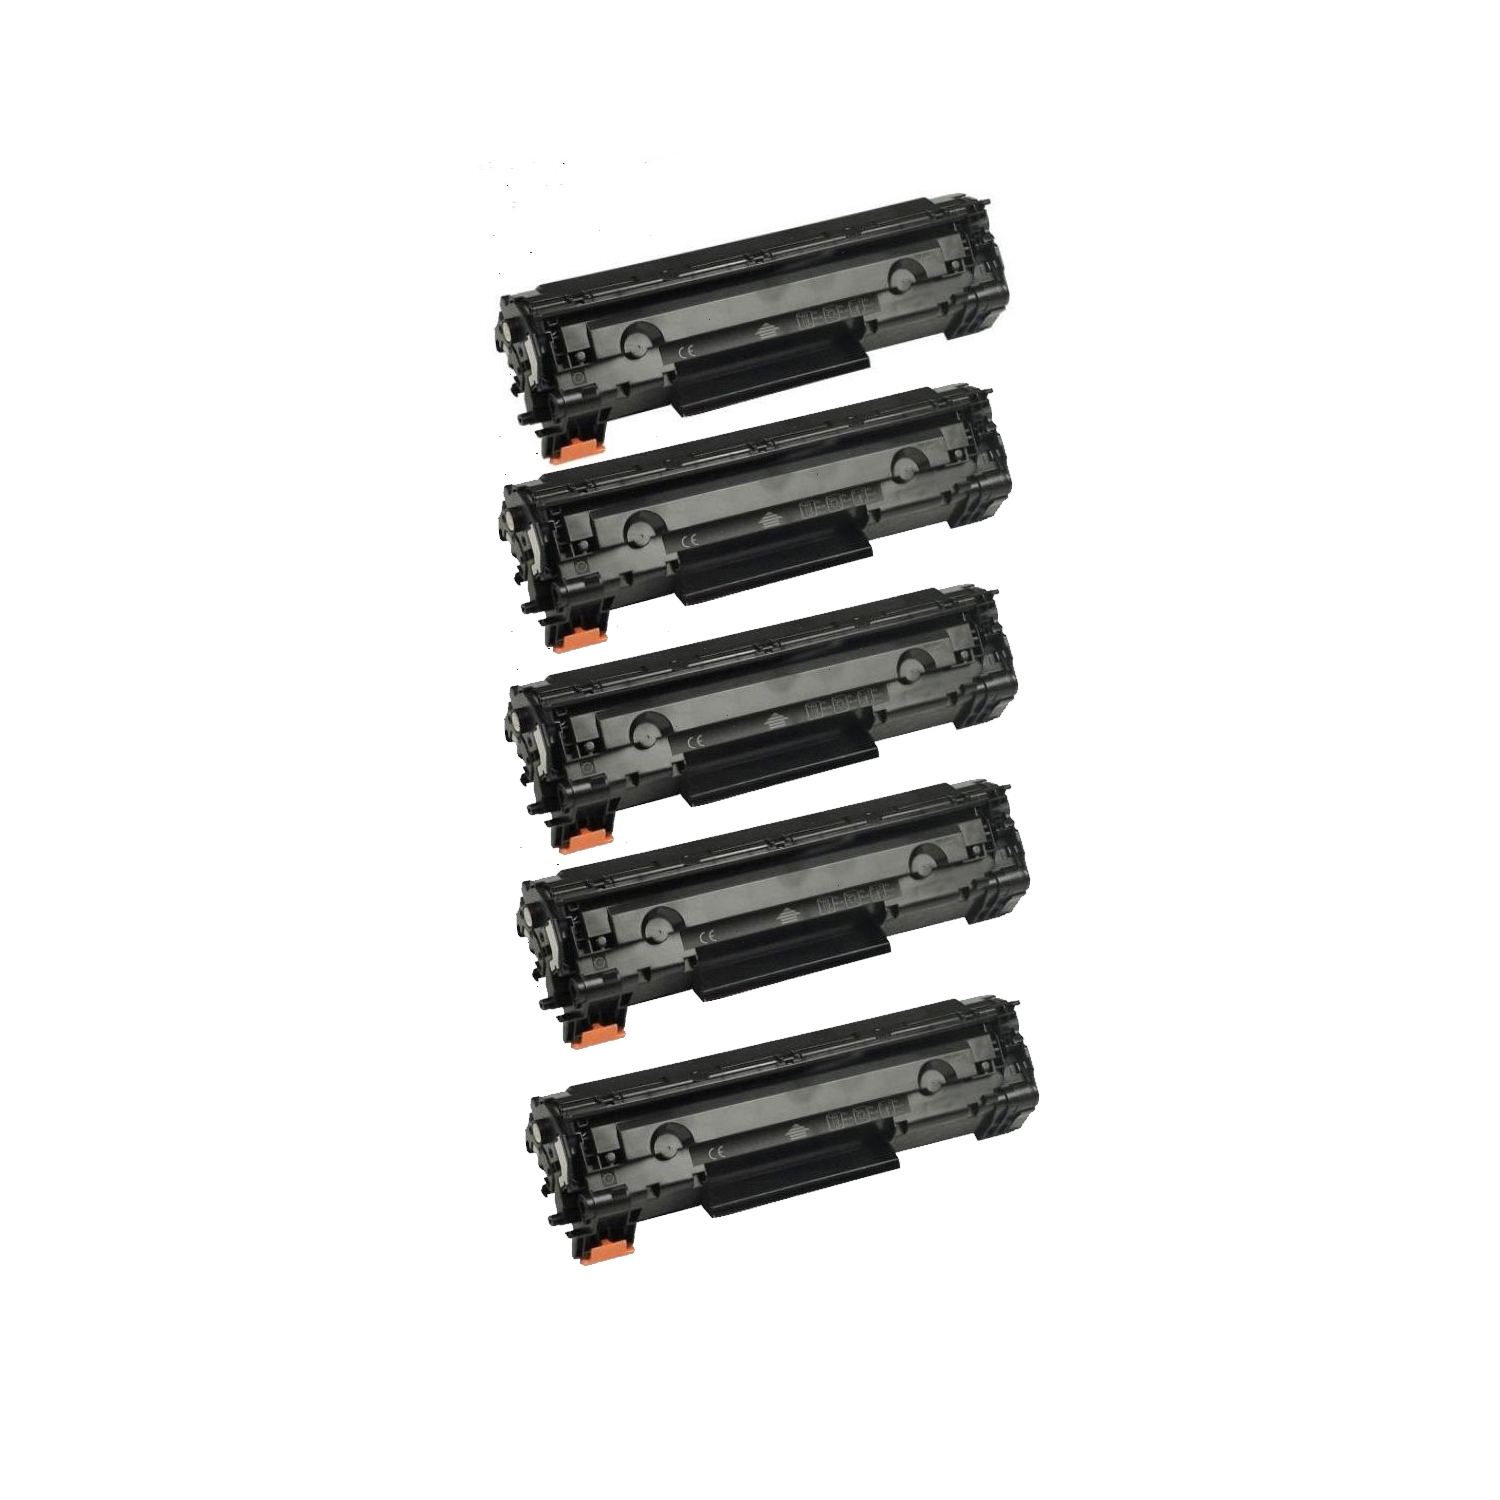 5Pack CF283A Compatible Toner Cartridge for HP 83A HP LaserJet Pro MFP M127fn, M127fw, M125nw, MFP M125rnw, M201n, M225dn